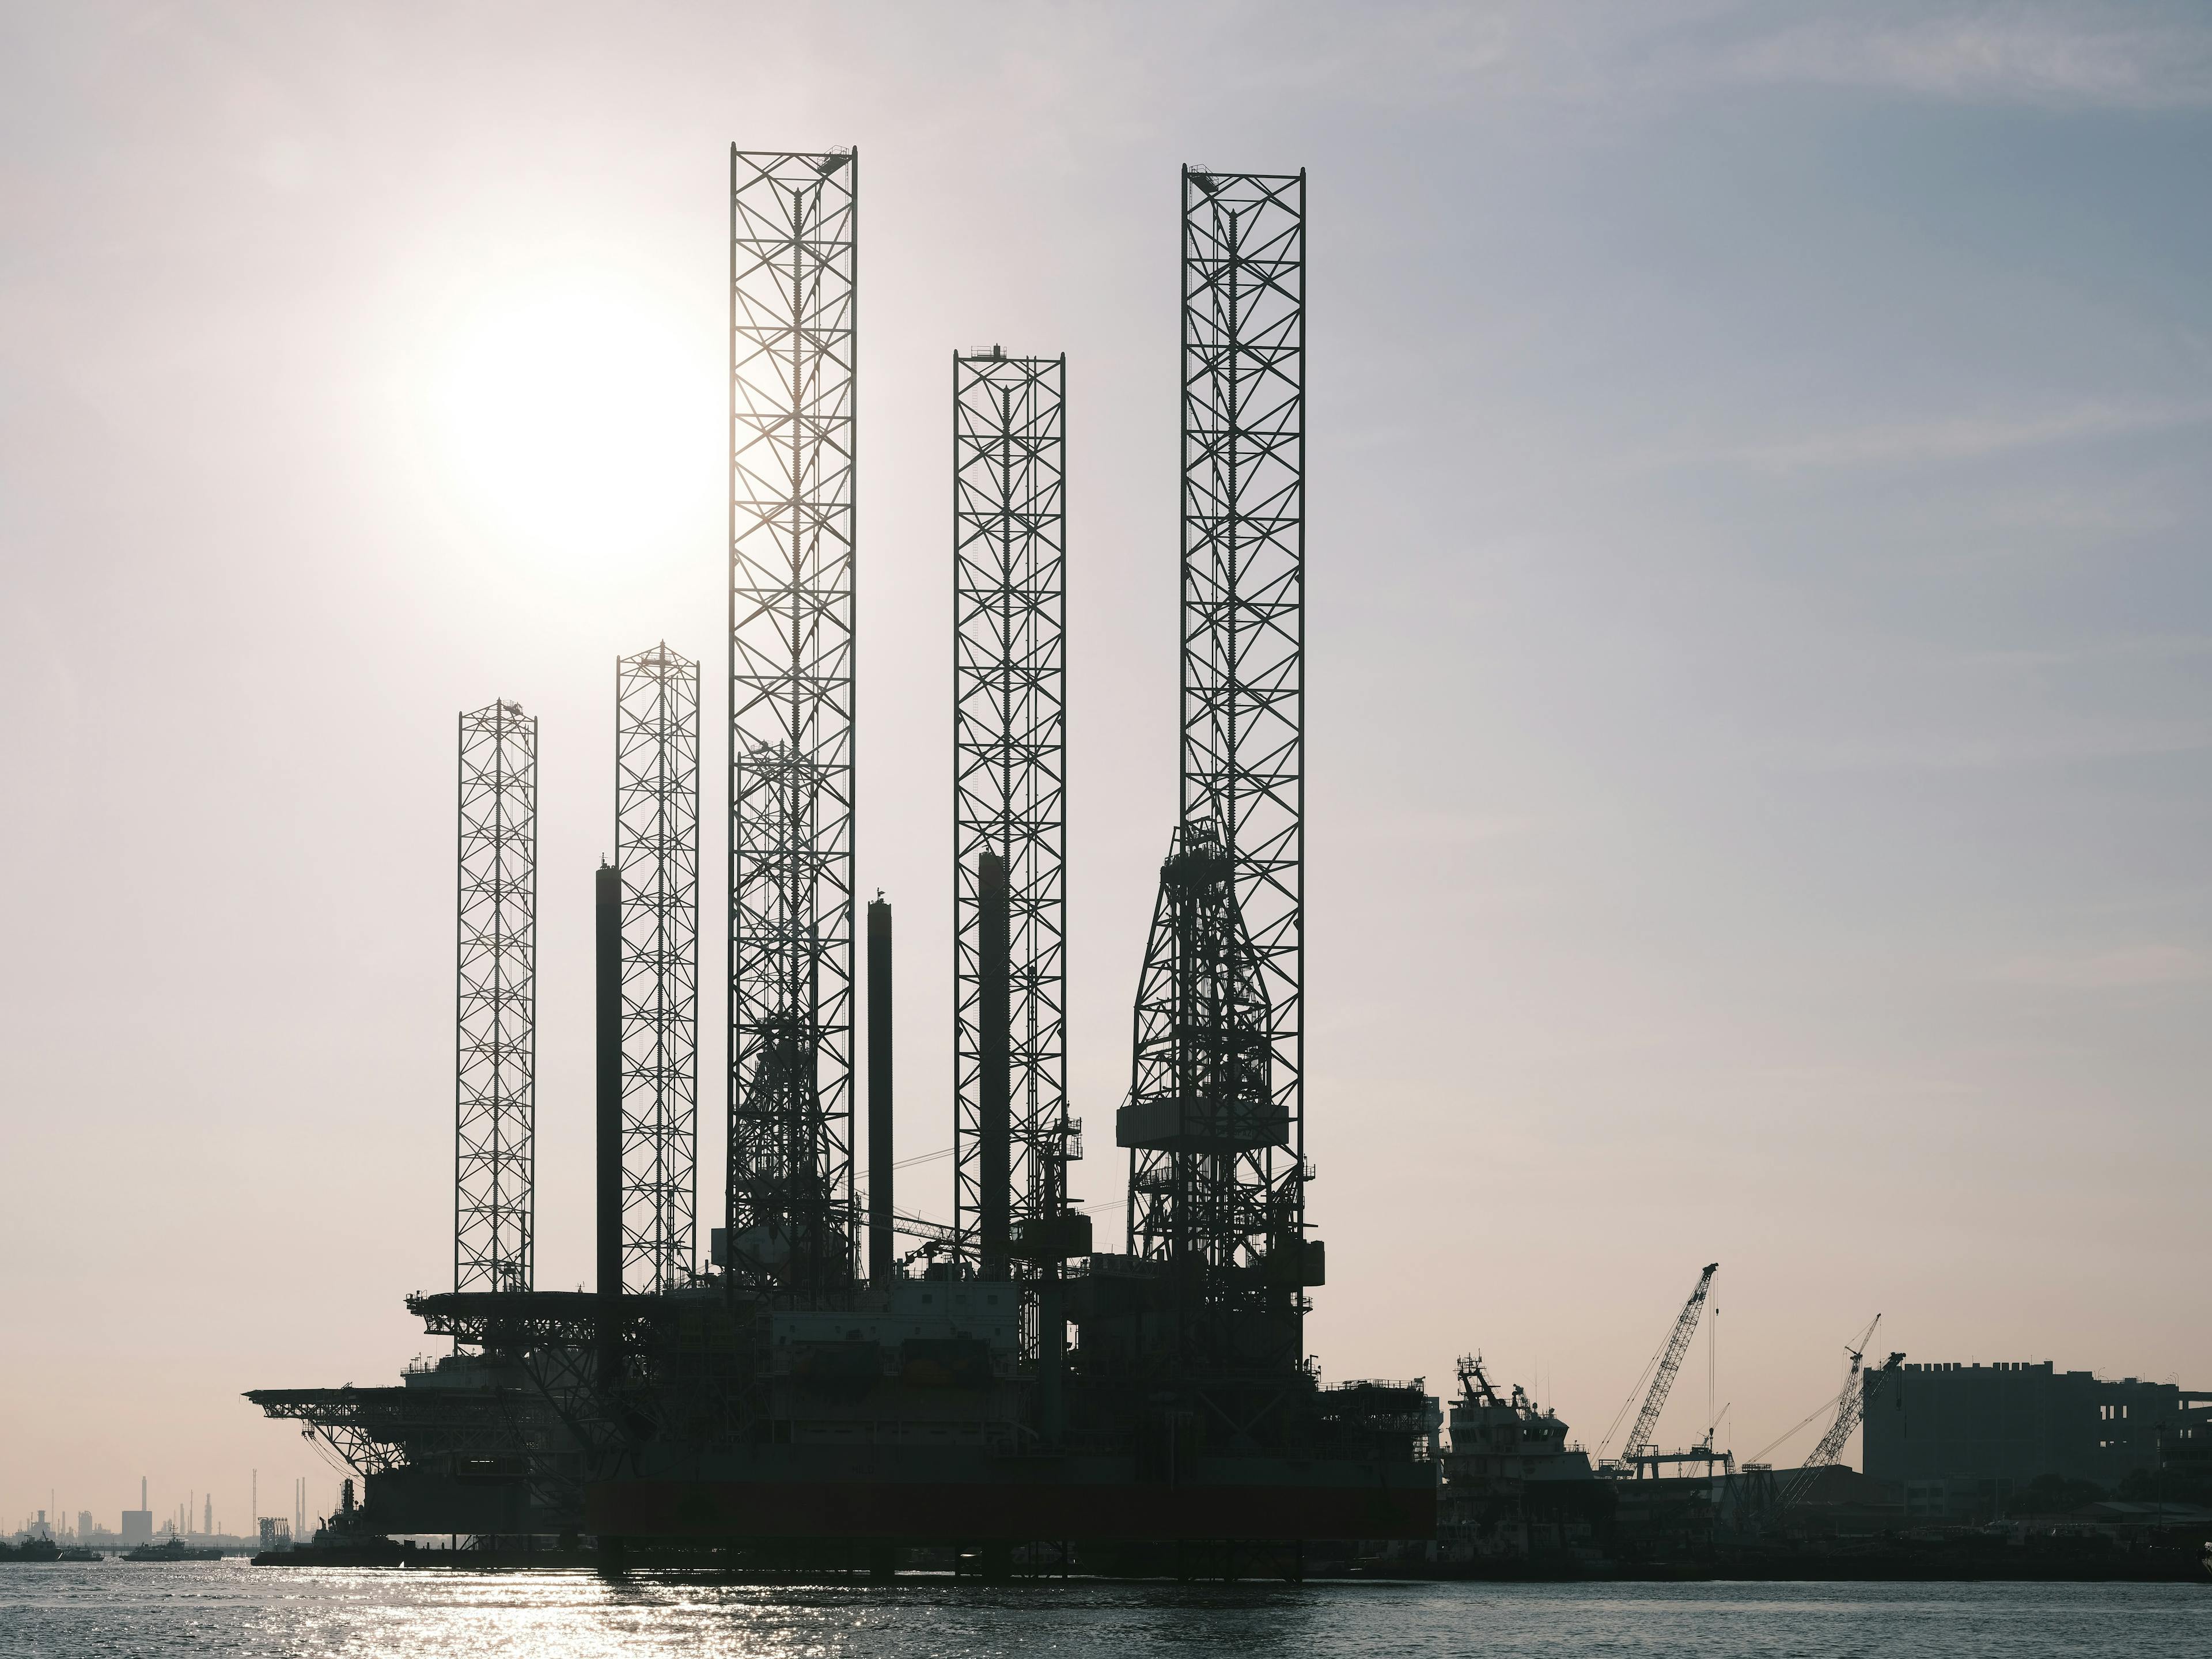 Five oil rigs stationed in the ocean